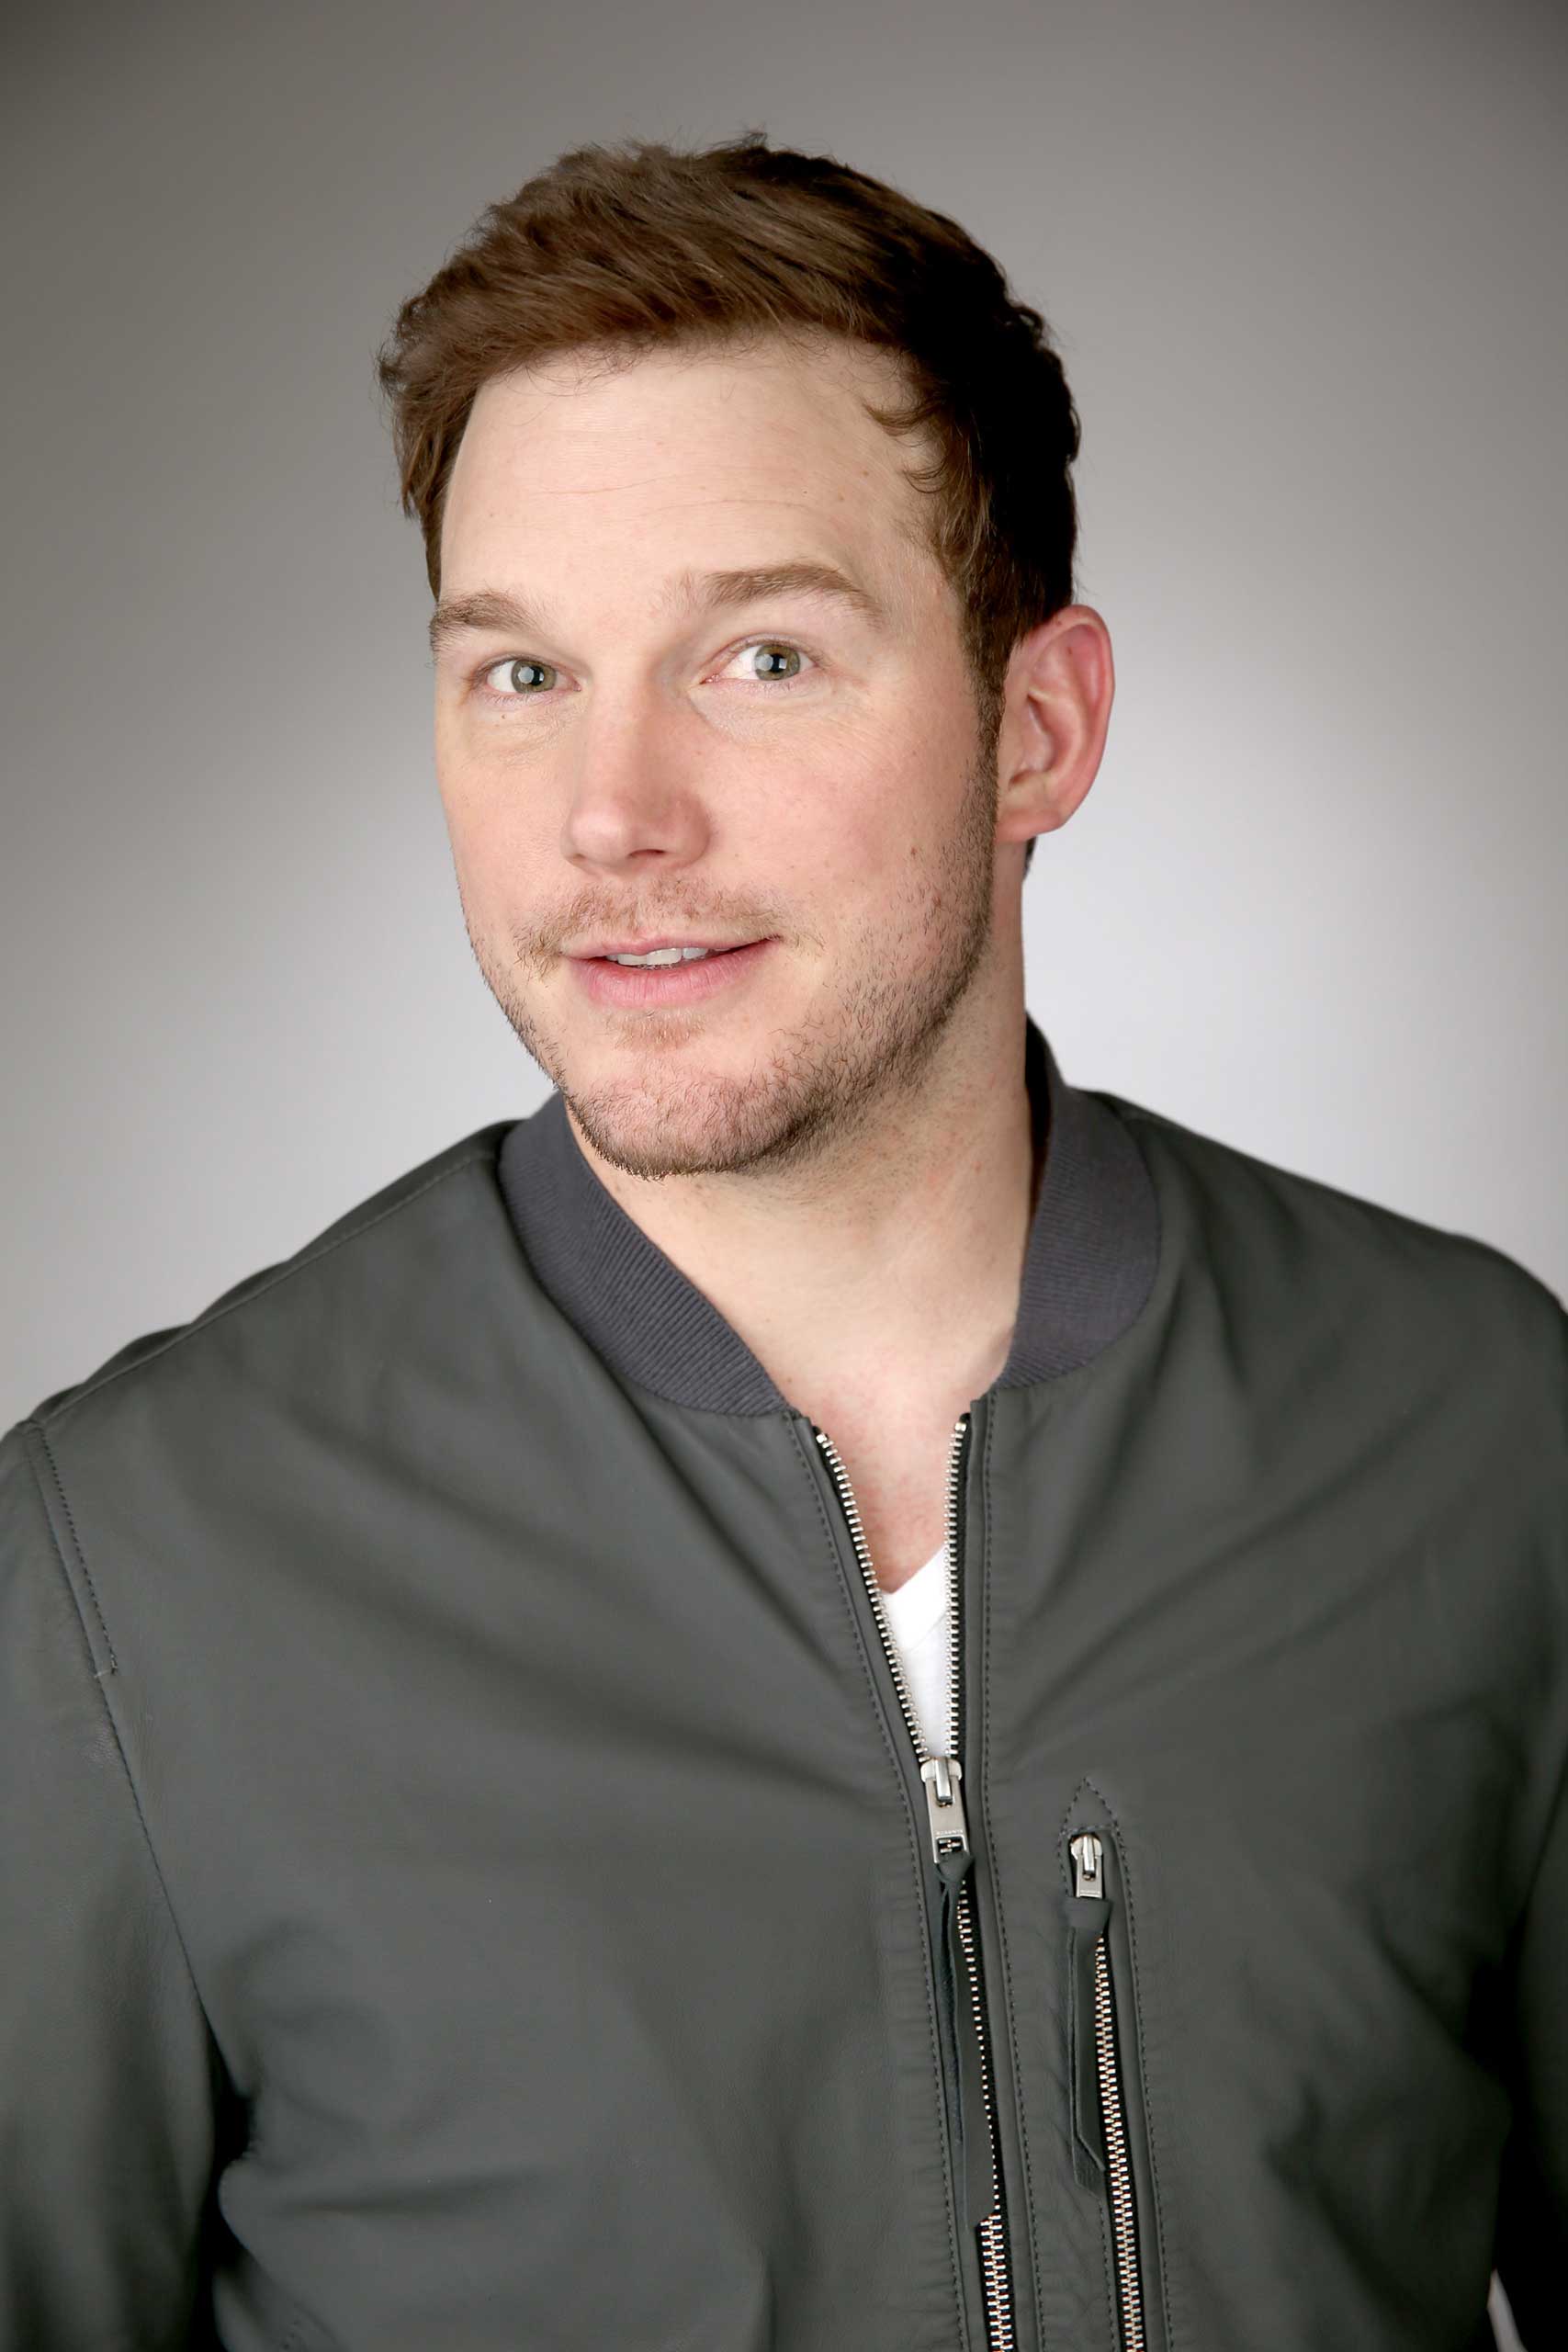 PASADENA, CA - JANUARY 16: Actor Chris Pratt of "Parks and Recreation" poses for a portrait during the NBCUniversal TCA Press Tour at The Langham Huntington, Pasadena on January 16, 2015 in Pasadena, California. (Photo by: Christopher Polk/NBC/NBCU Photo Bank via Getty Images) NUP_166973_2968.JPG